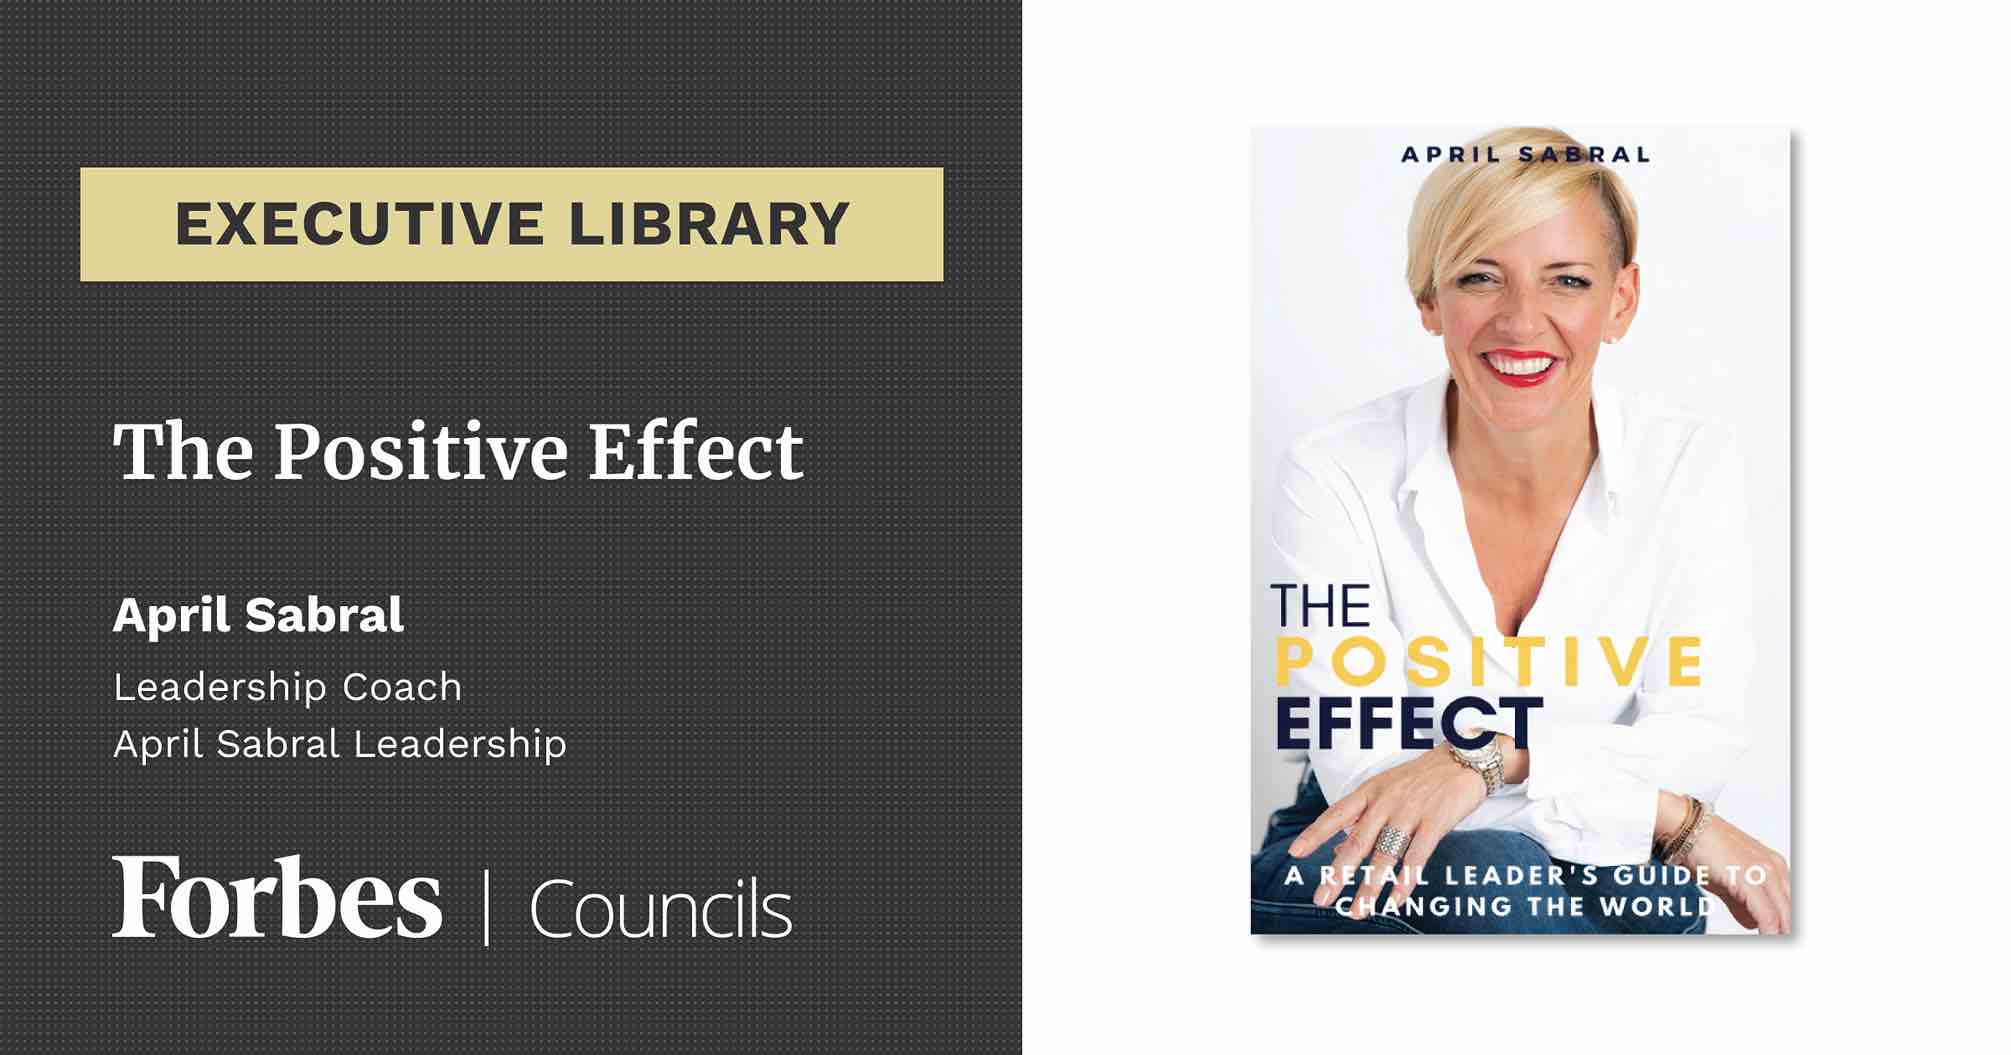 The Positive Effect By April Sabral